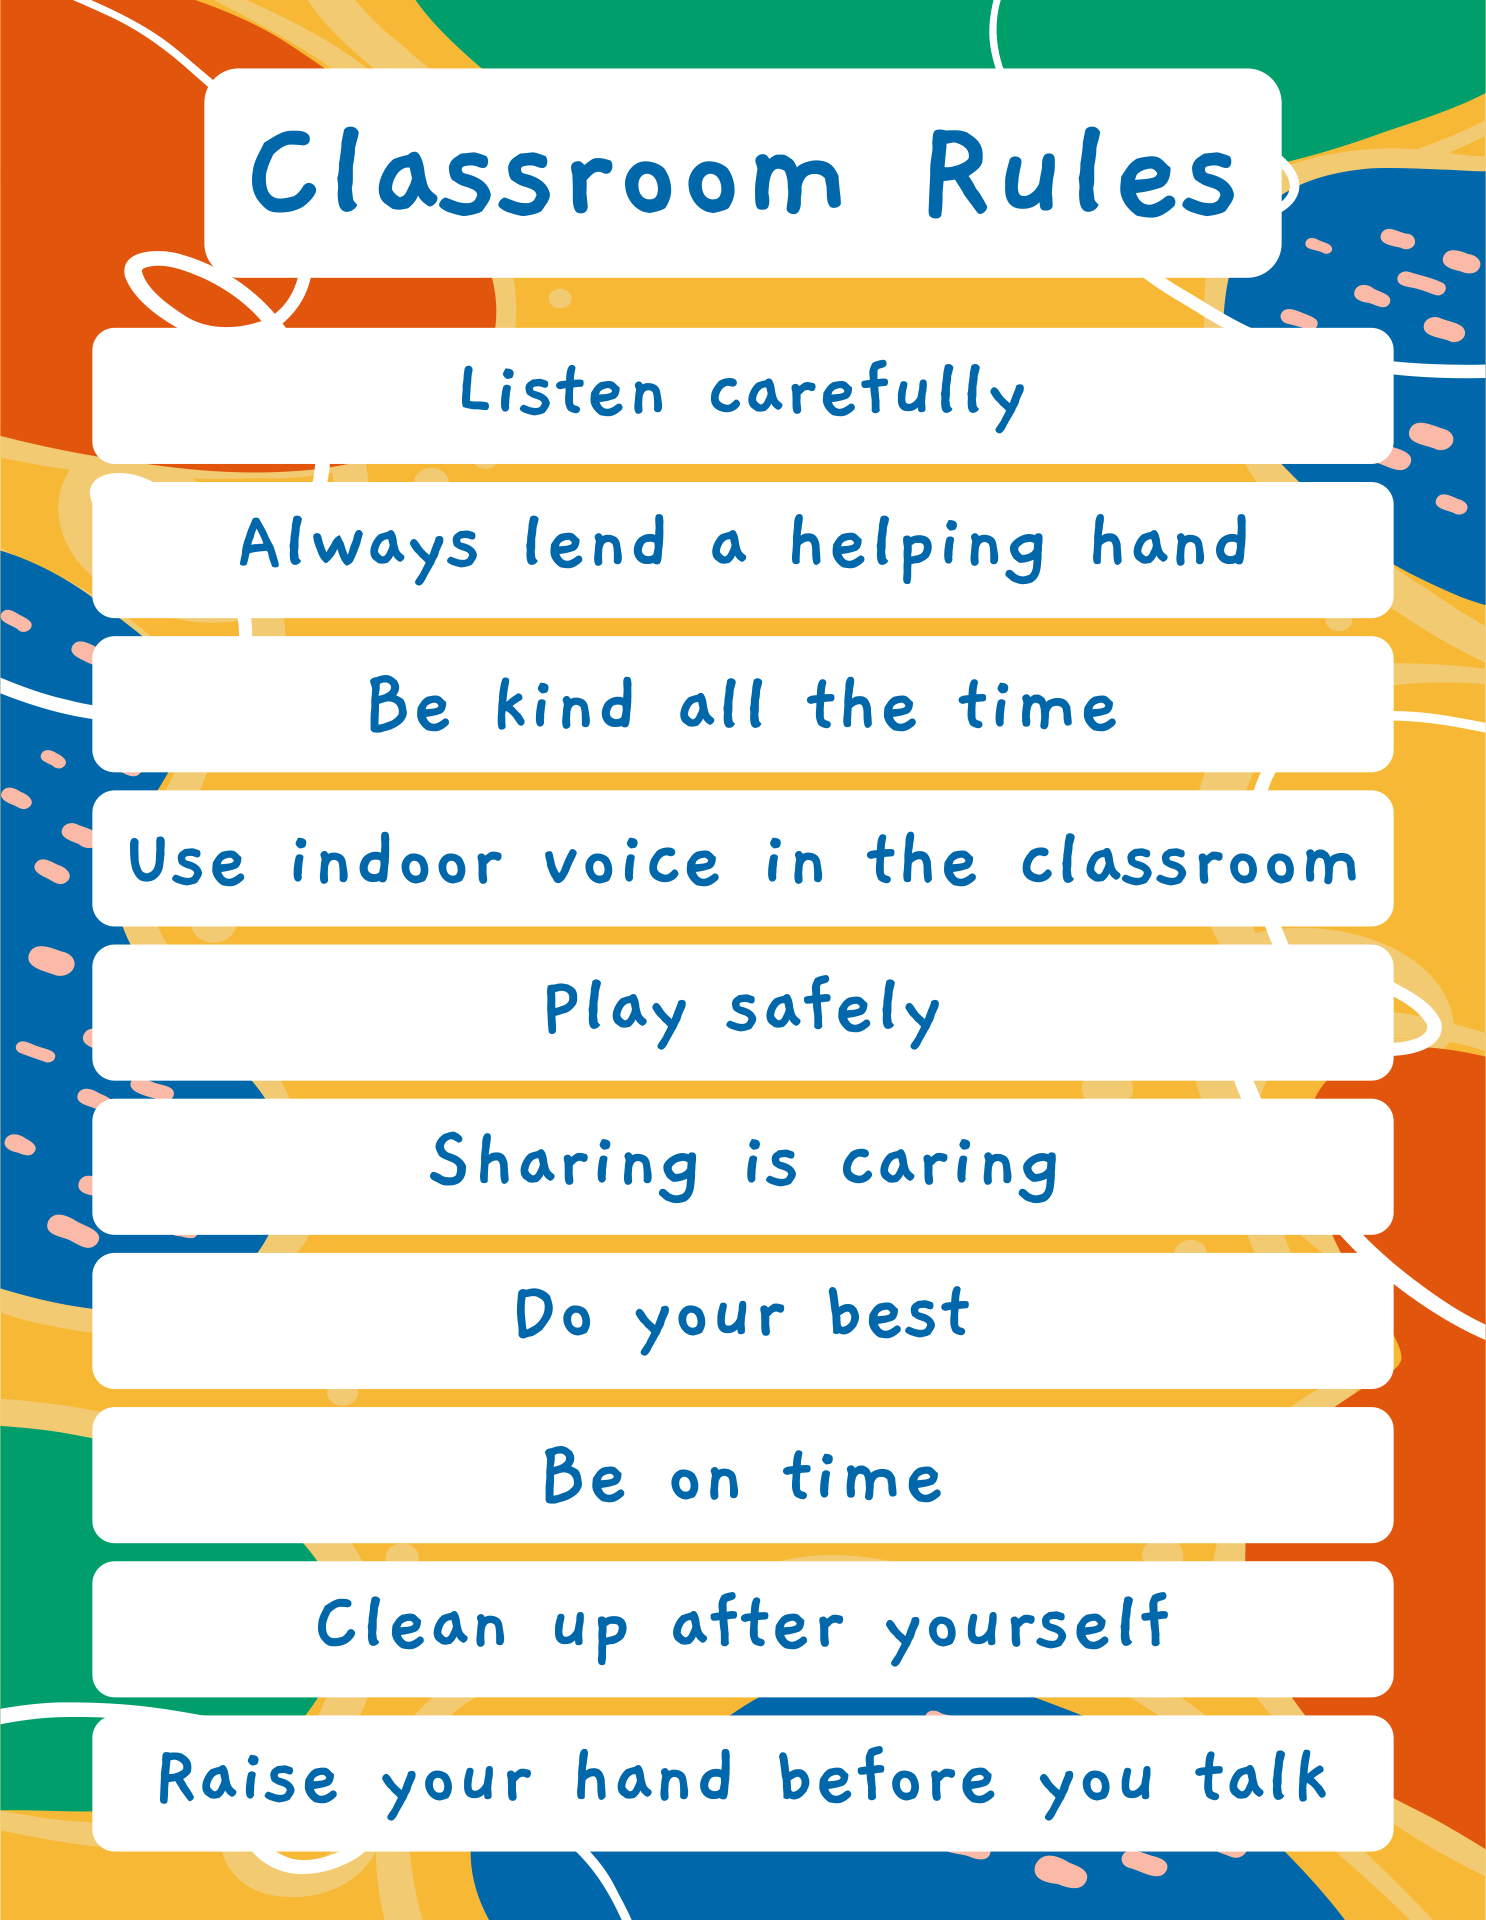 5-best-images-of-free-teacher-printables-classroom-rules-printable-classroom-rules-free